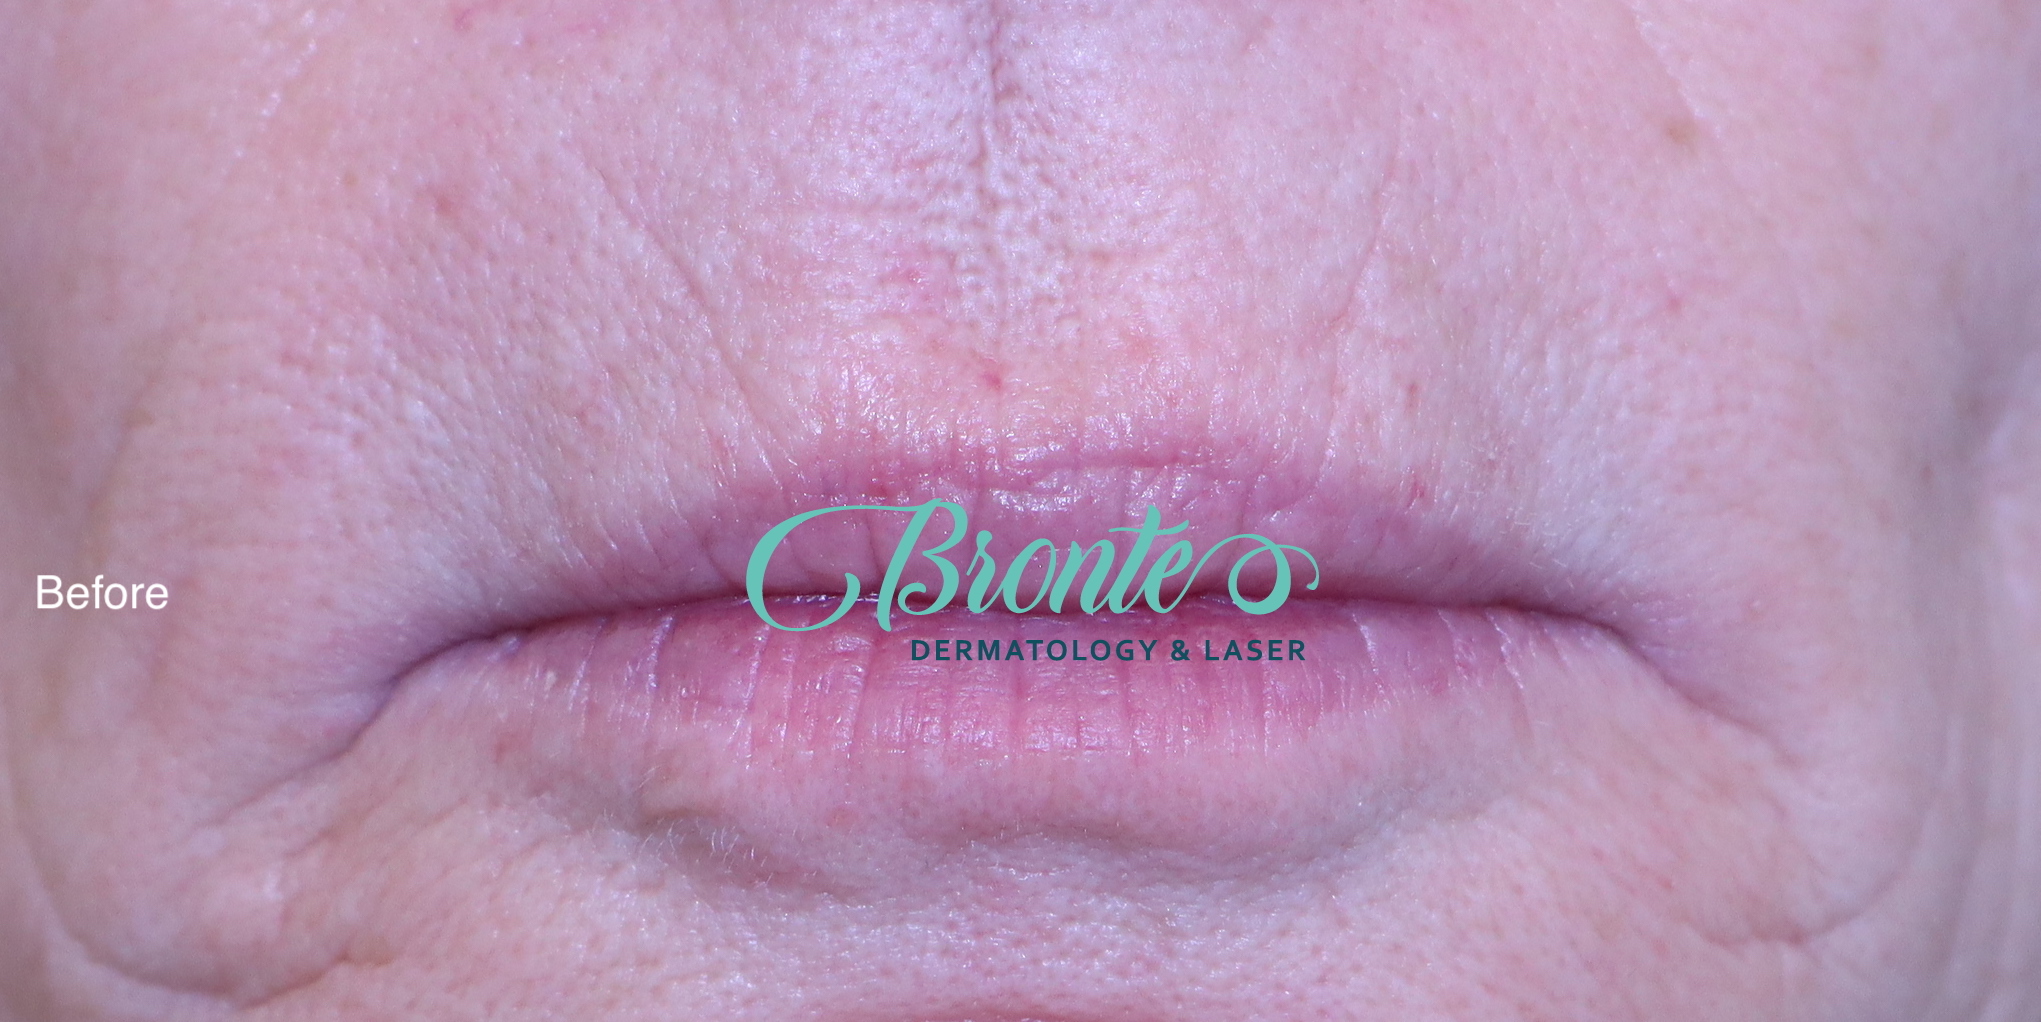 Before & 7 weeks after fractional Co2 laser treatment for personal wrinkle